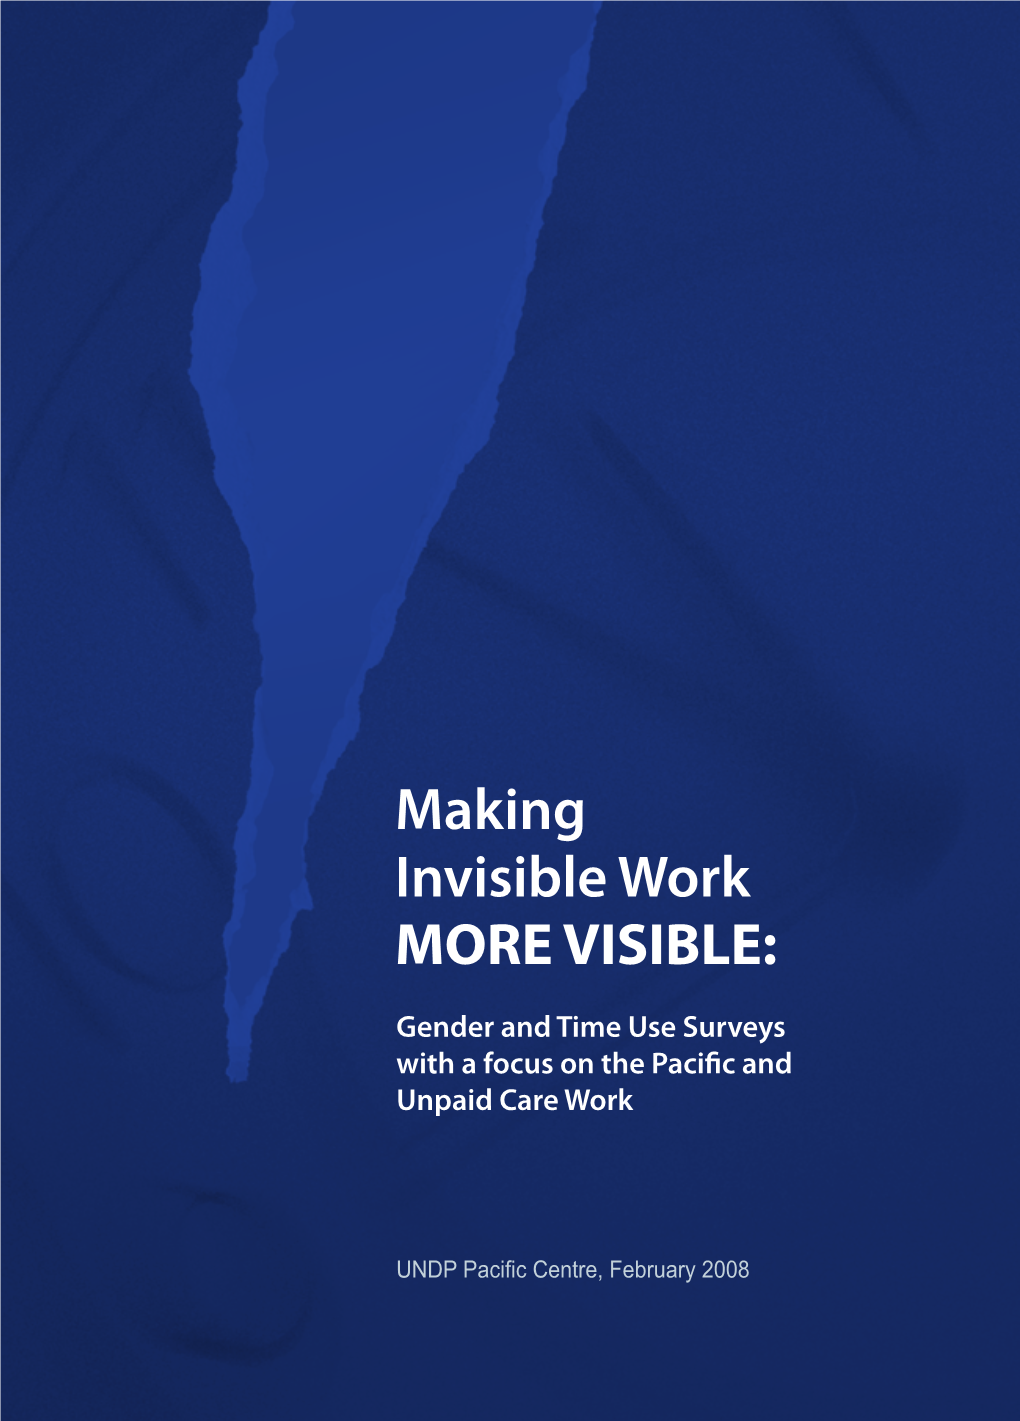 Making Invisible Work MORE VISIBLE